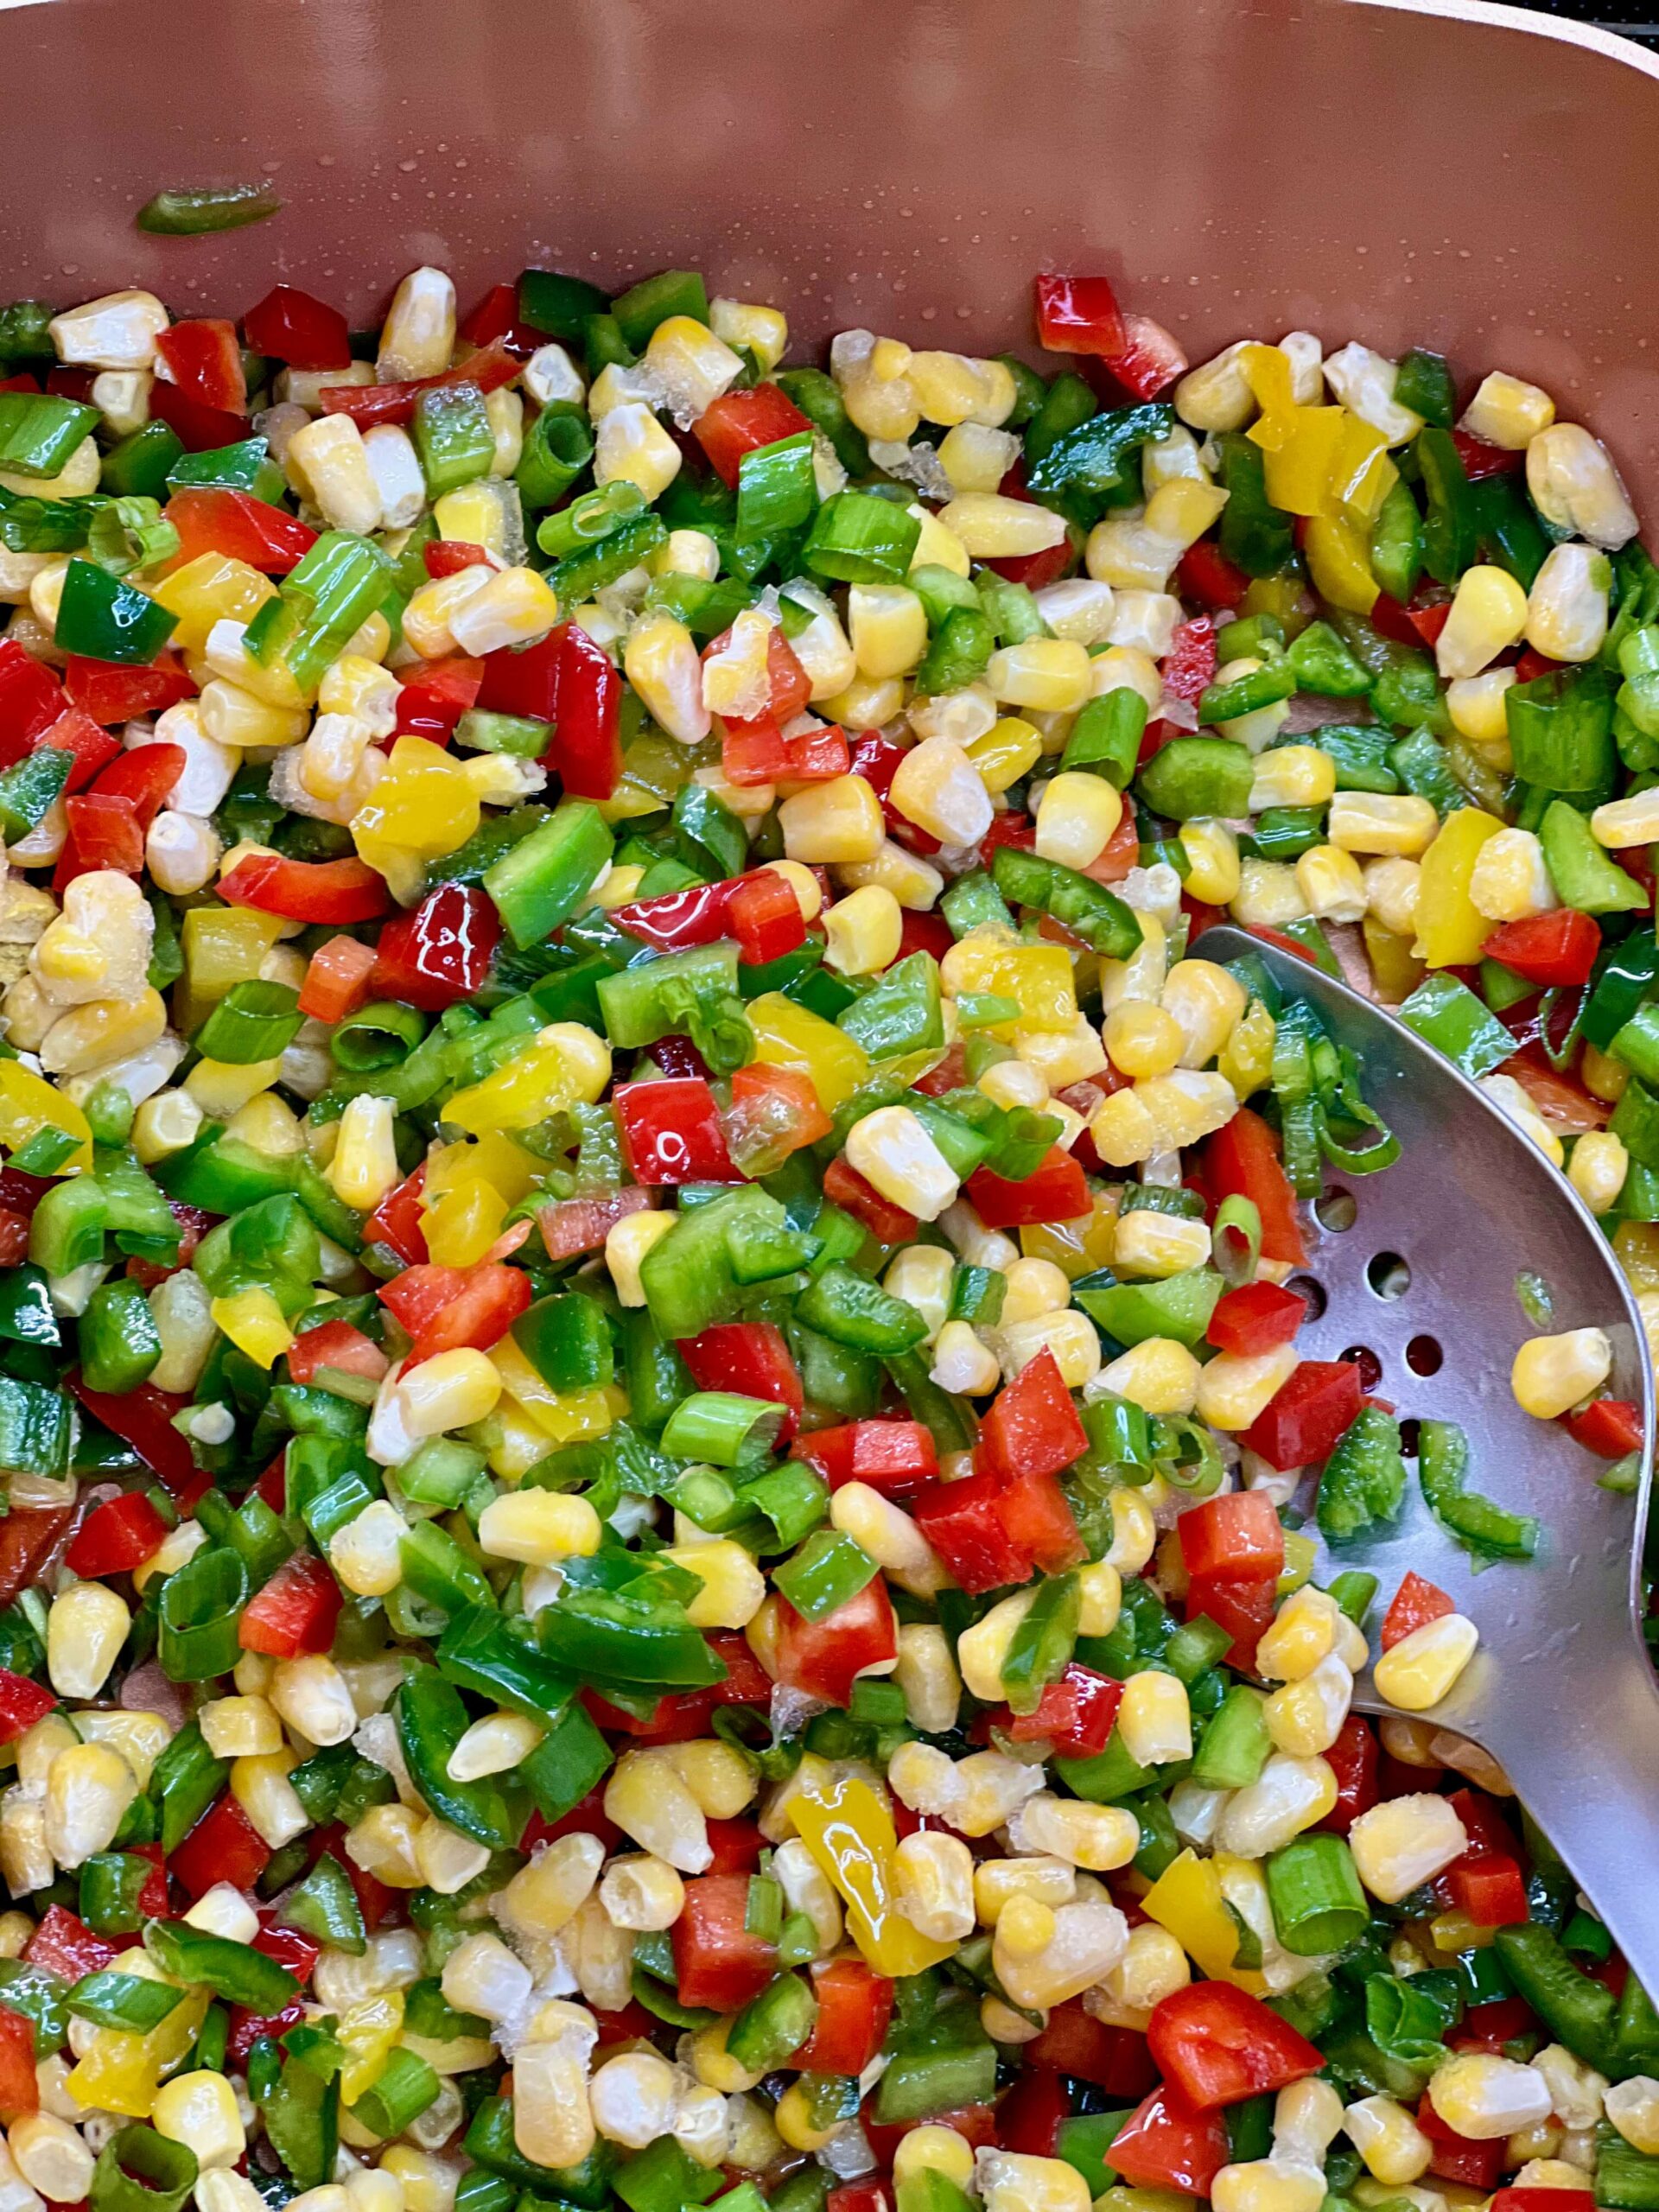 Saute the peppers, corn and onion